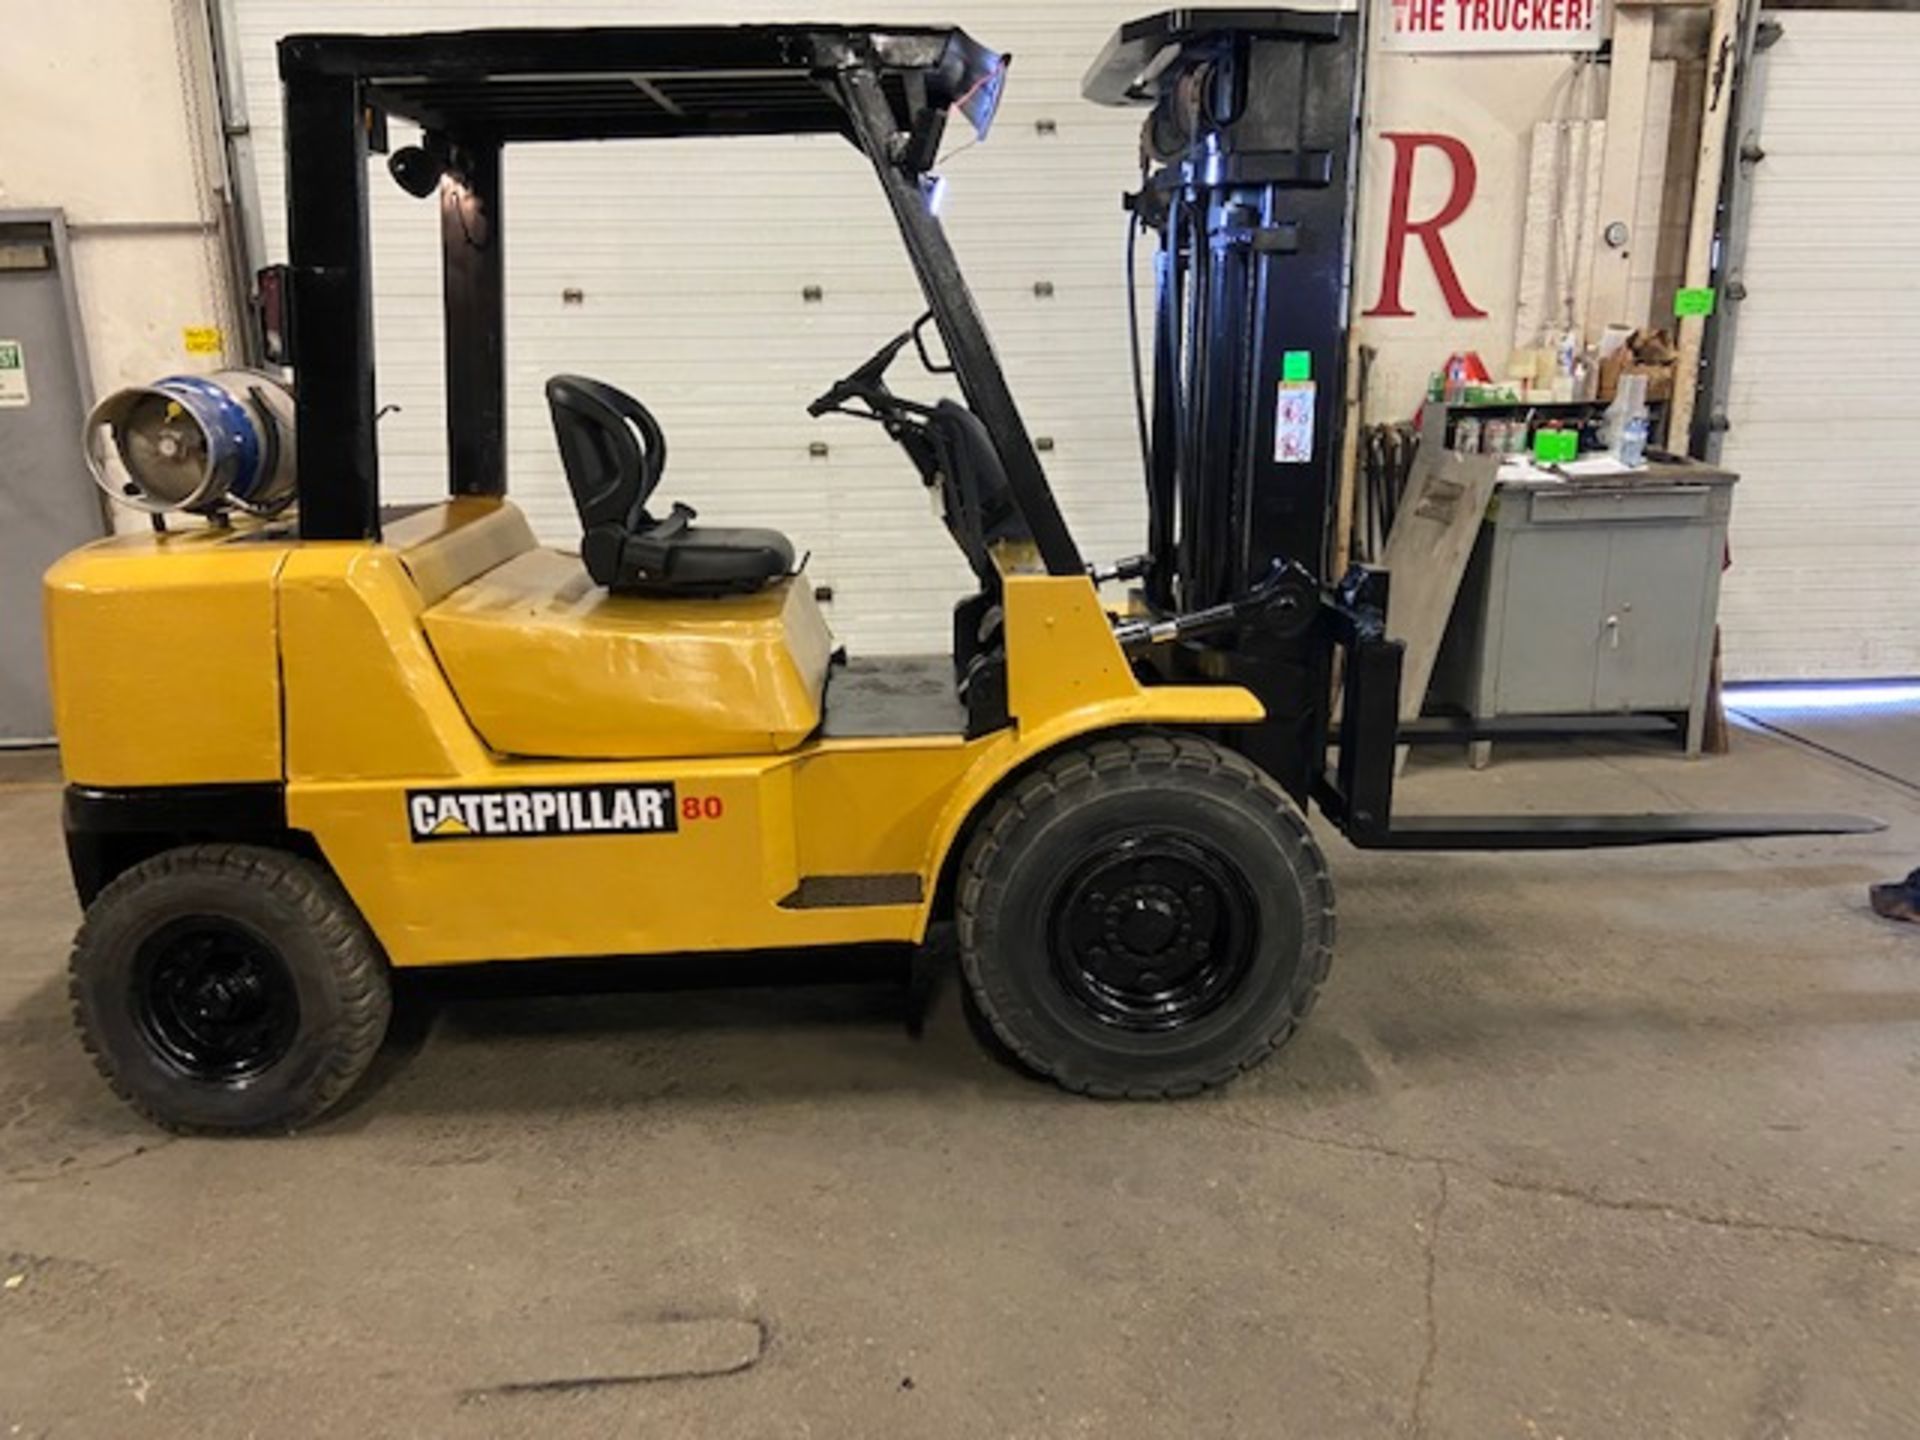 FREE CUSTOMS - Caterpillar 8,000lbs Capacity LPG (propane) OUTDOOR Forklift with 3 stage mast (no